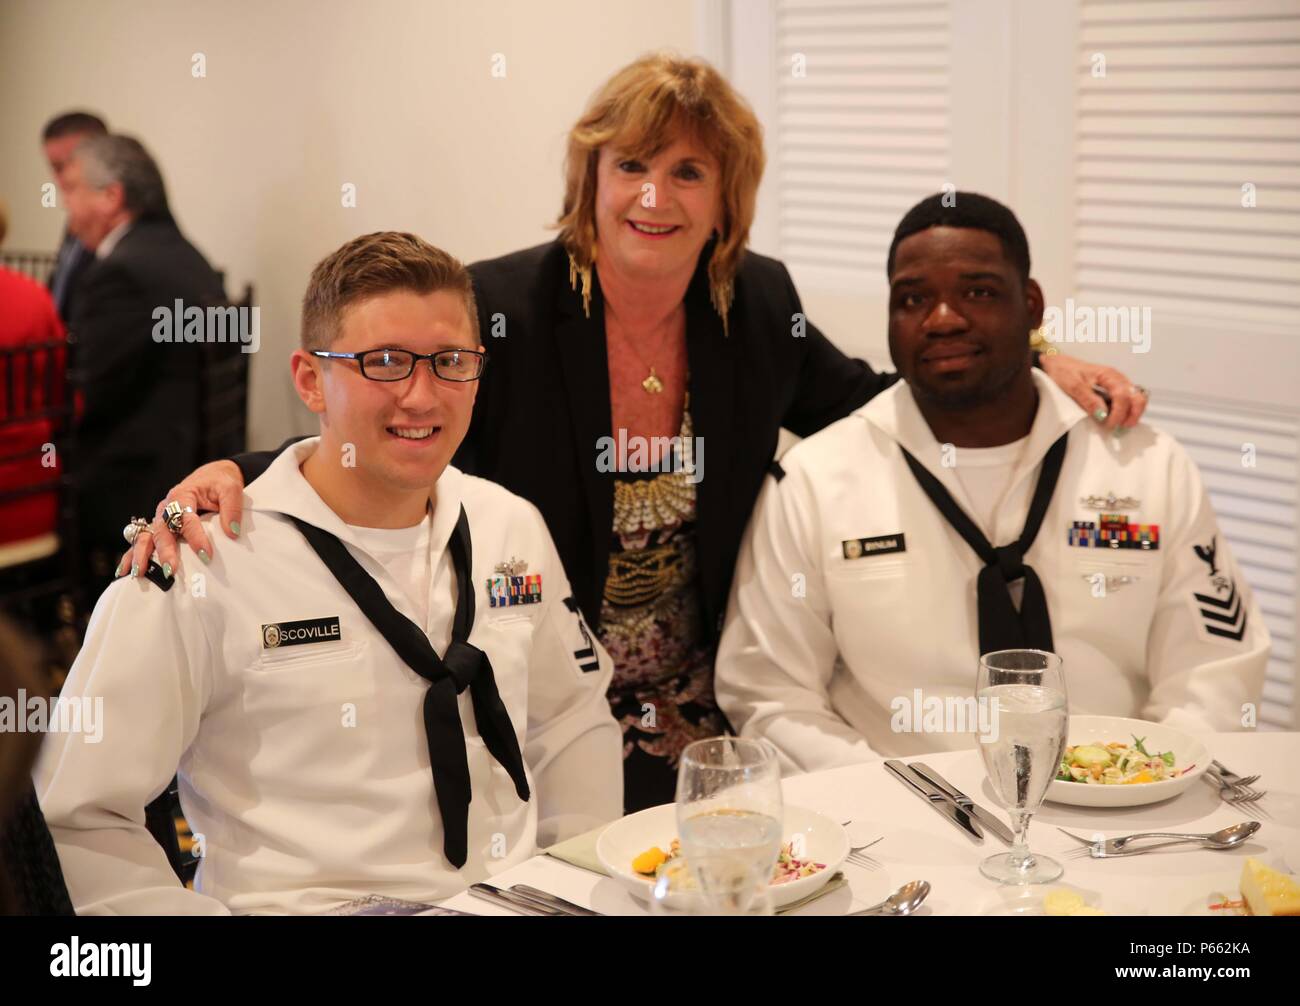 Mary Anne Gray, a Broward Navy Days leader, poses for a picture with some Sailors from the USS Bataan during the Port Everglades Association Luncheon as a part of Fleet Week Port Everglades, Fort Lauderdale, Fla., May 6, 2016. Fleet Week will give the community of South Florida the opportunity to interact with the Marines and Sailors of the ship as well as see up-close and personal some of the capabilities and equipment the Marine Corps employs. (U.S. Marine Corps photo by Lance Cpl. Brianna Gaudi/Released.) Stock Photo